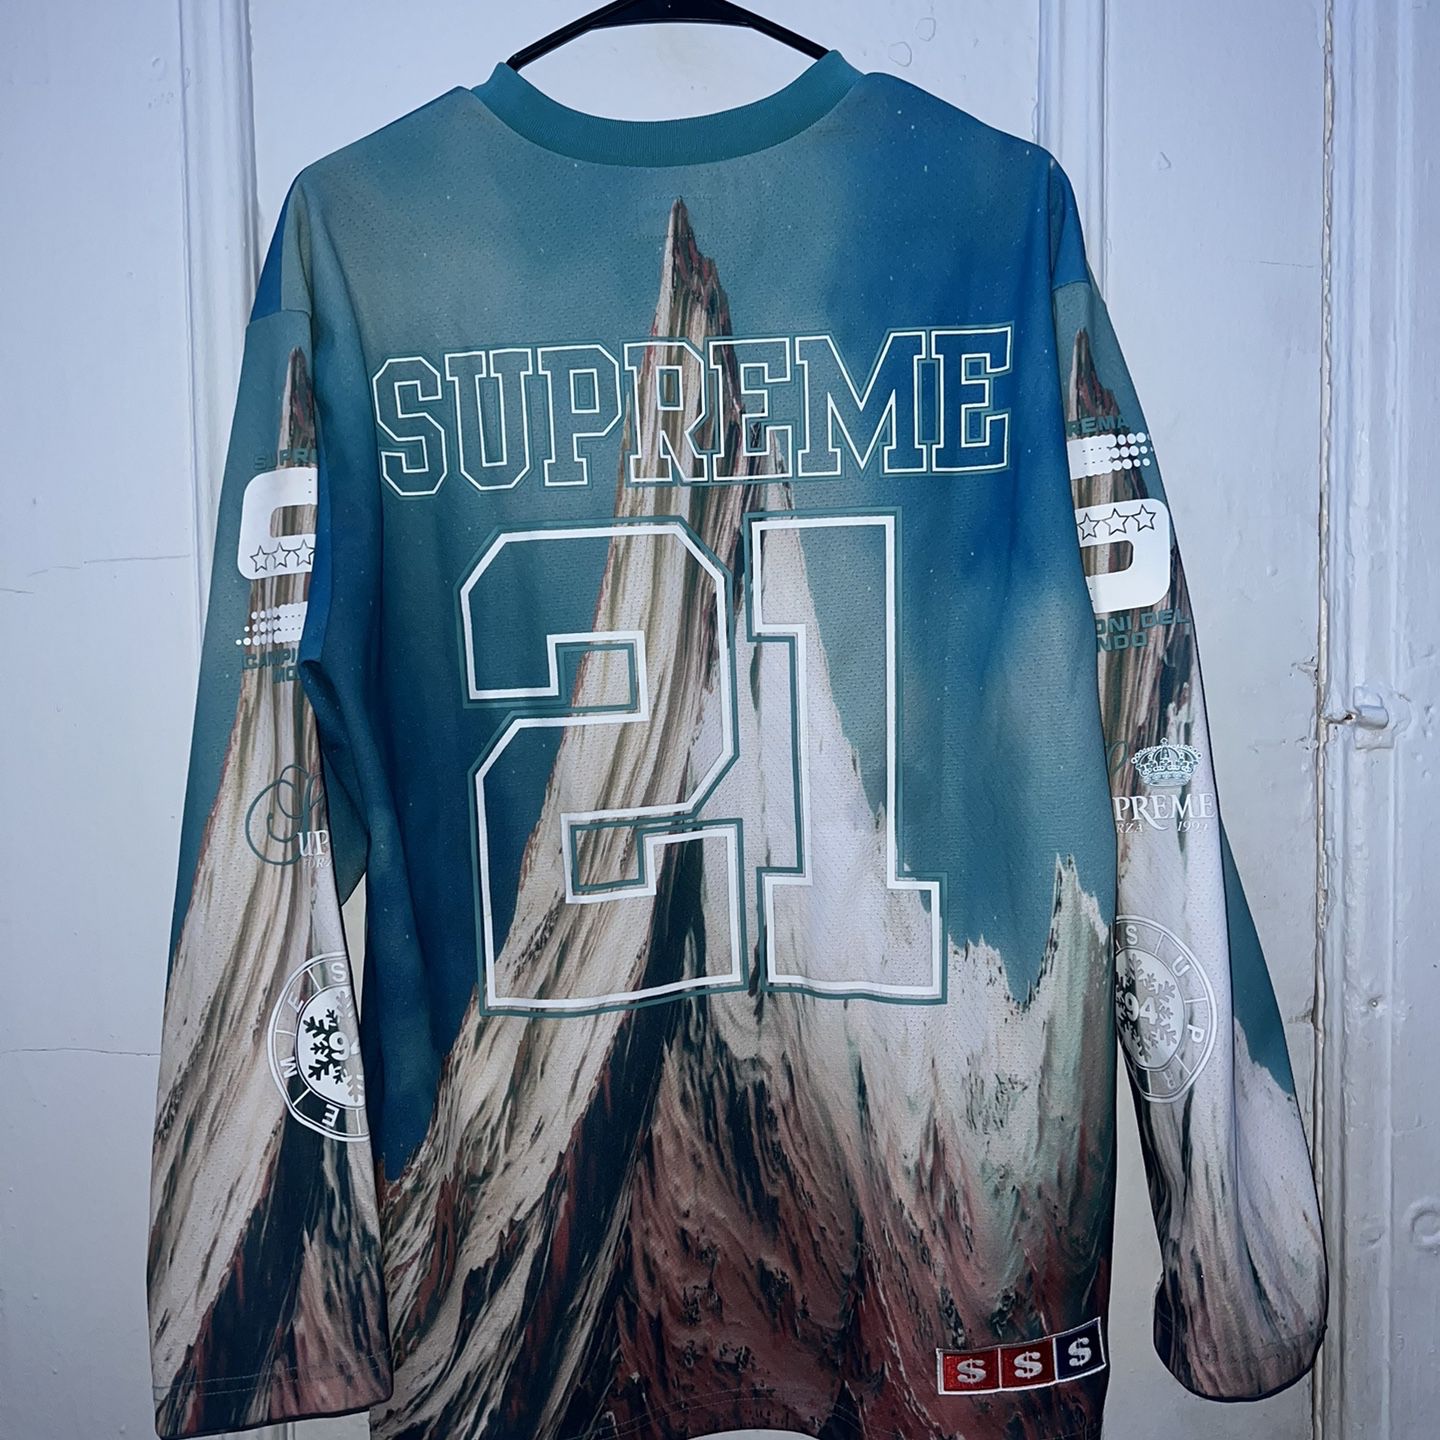 Hockey jersey for Sale in Sturtevant, WI - OfferUp